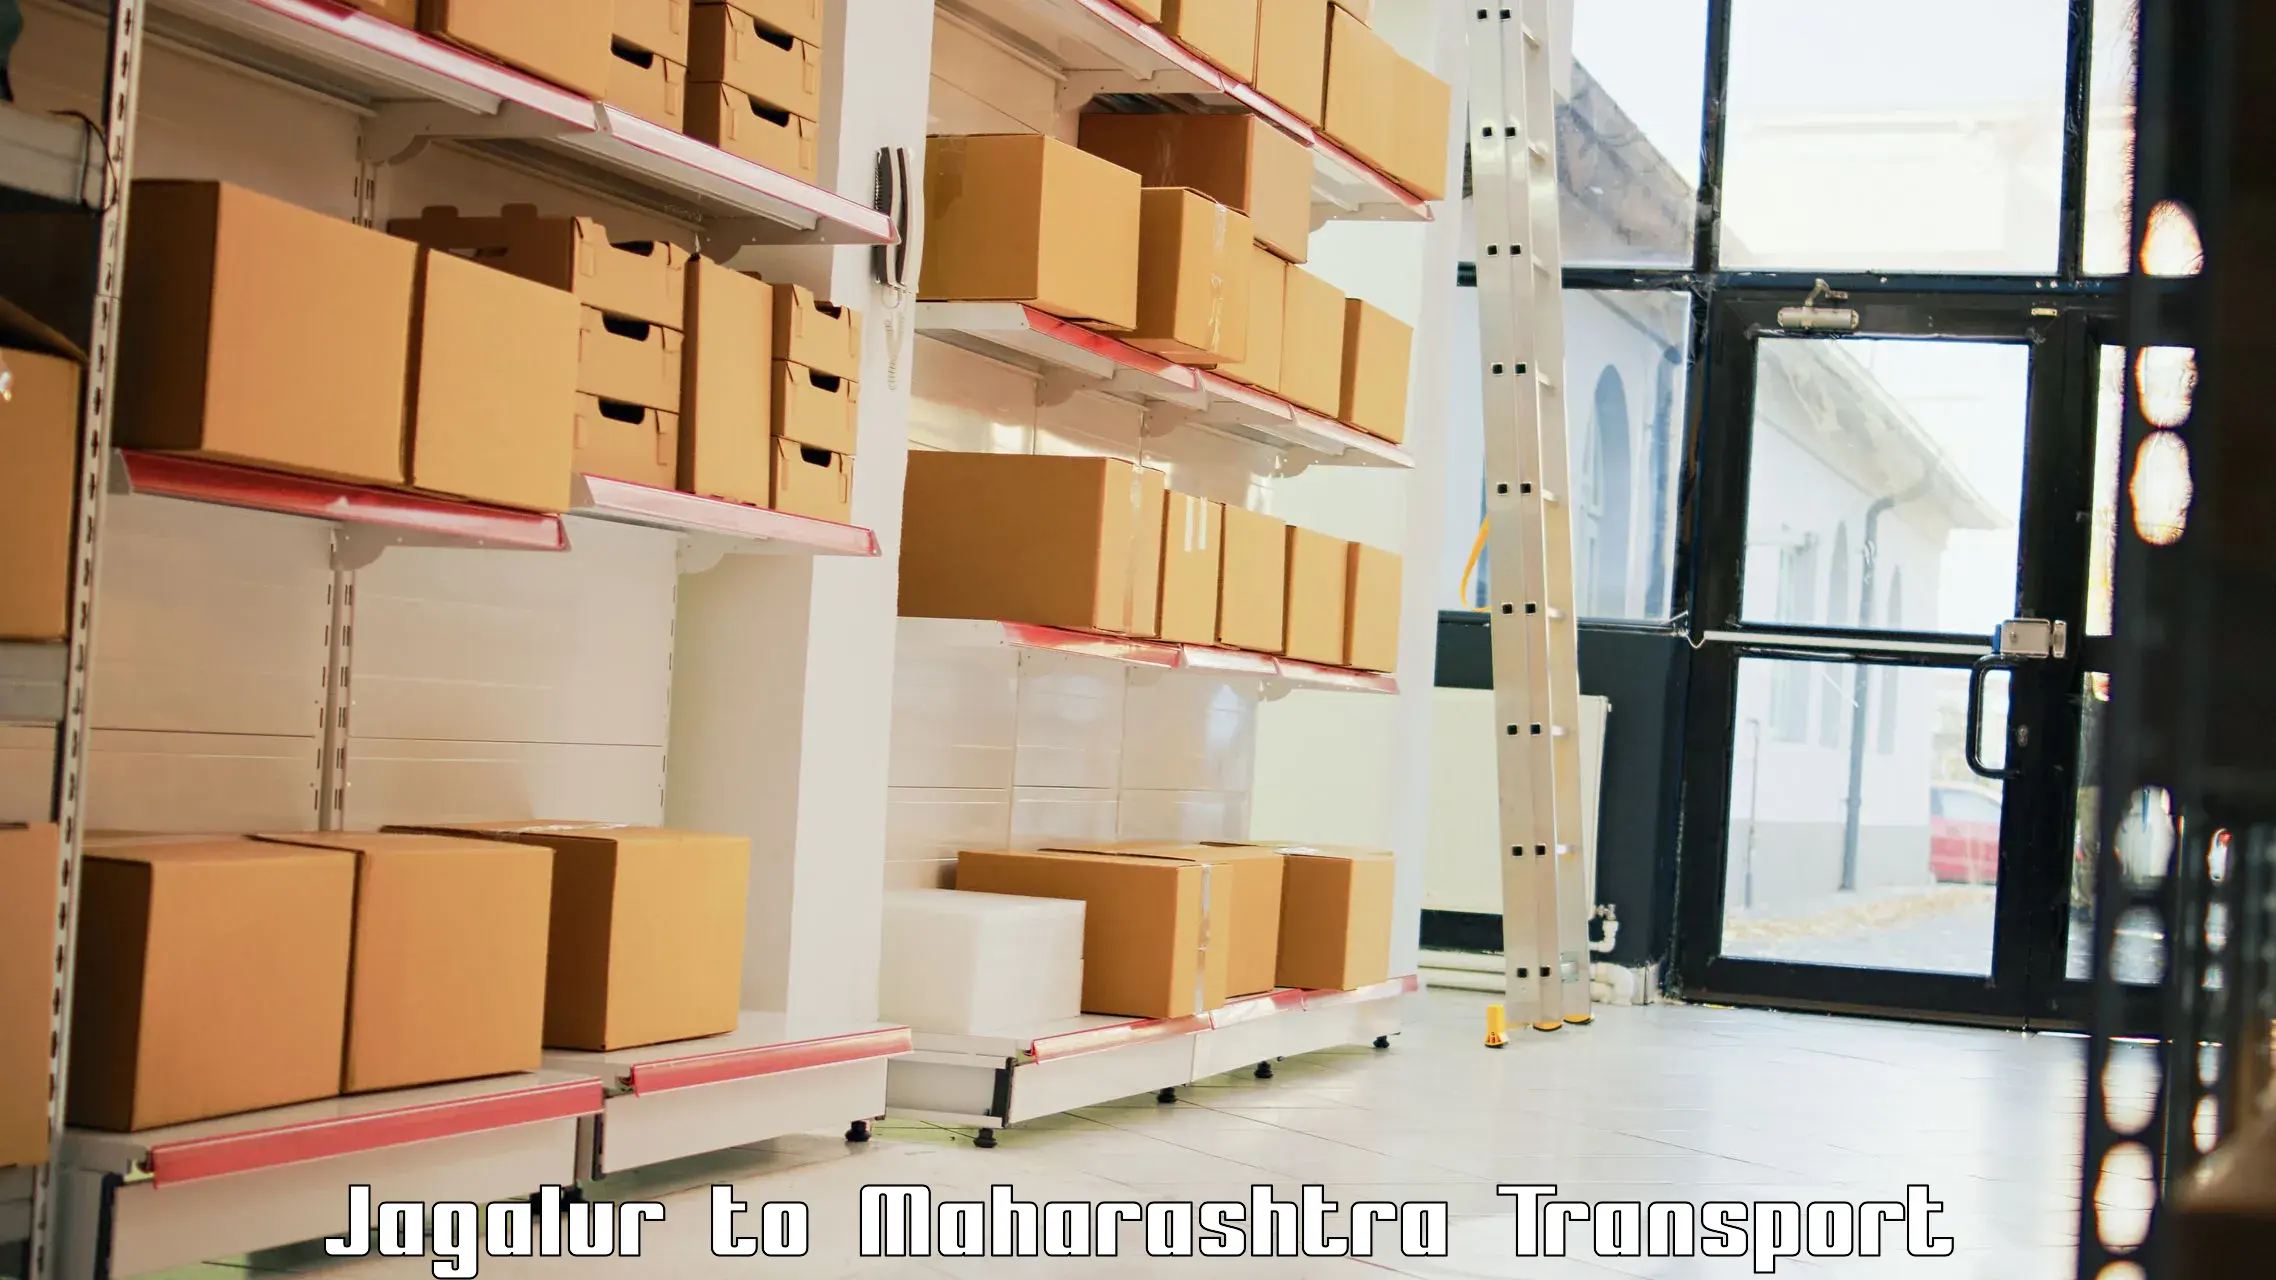 Furniture transport service in Jagalur to Thane